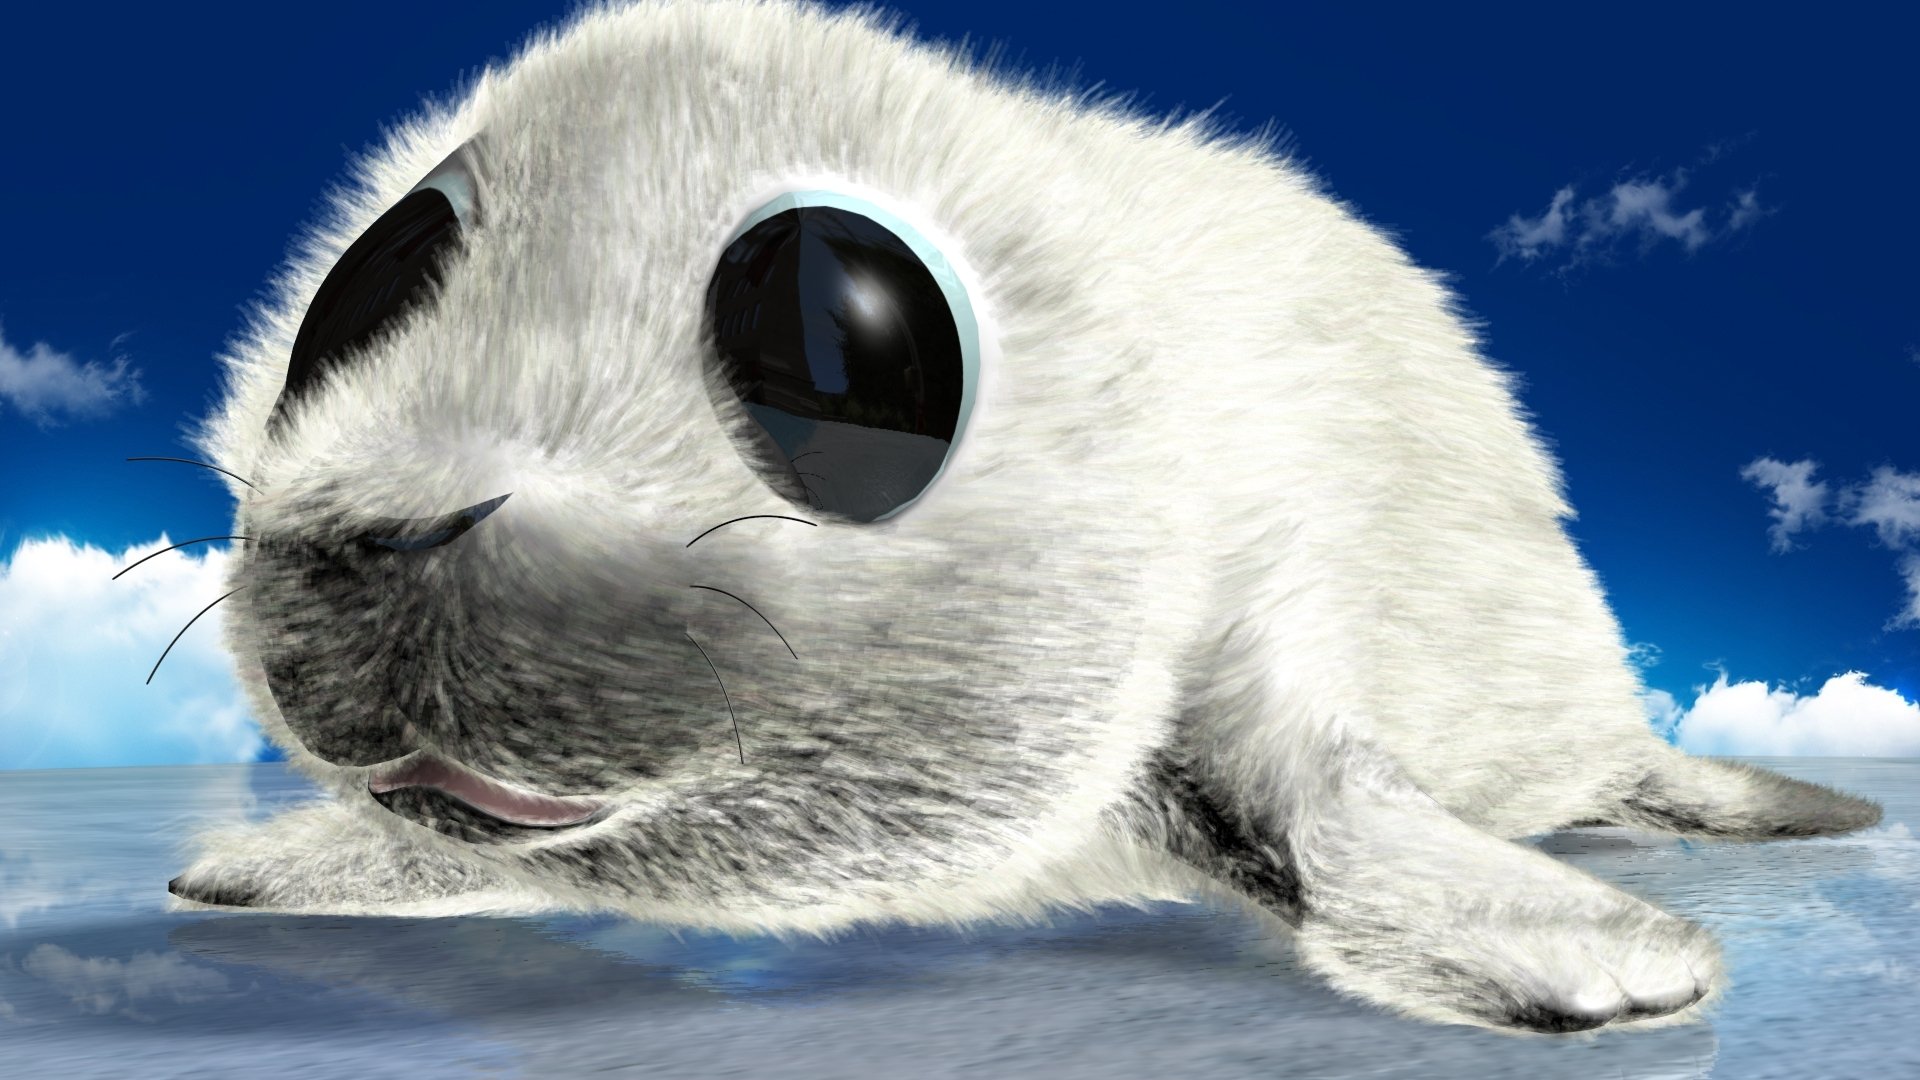 Cartoon Baby Seal Hd Wallpaper Background Image 1920x1080 Id 559963 Wallpaper Abyss